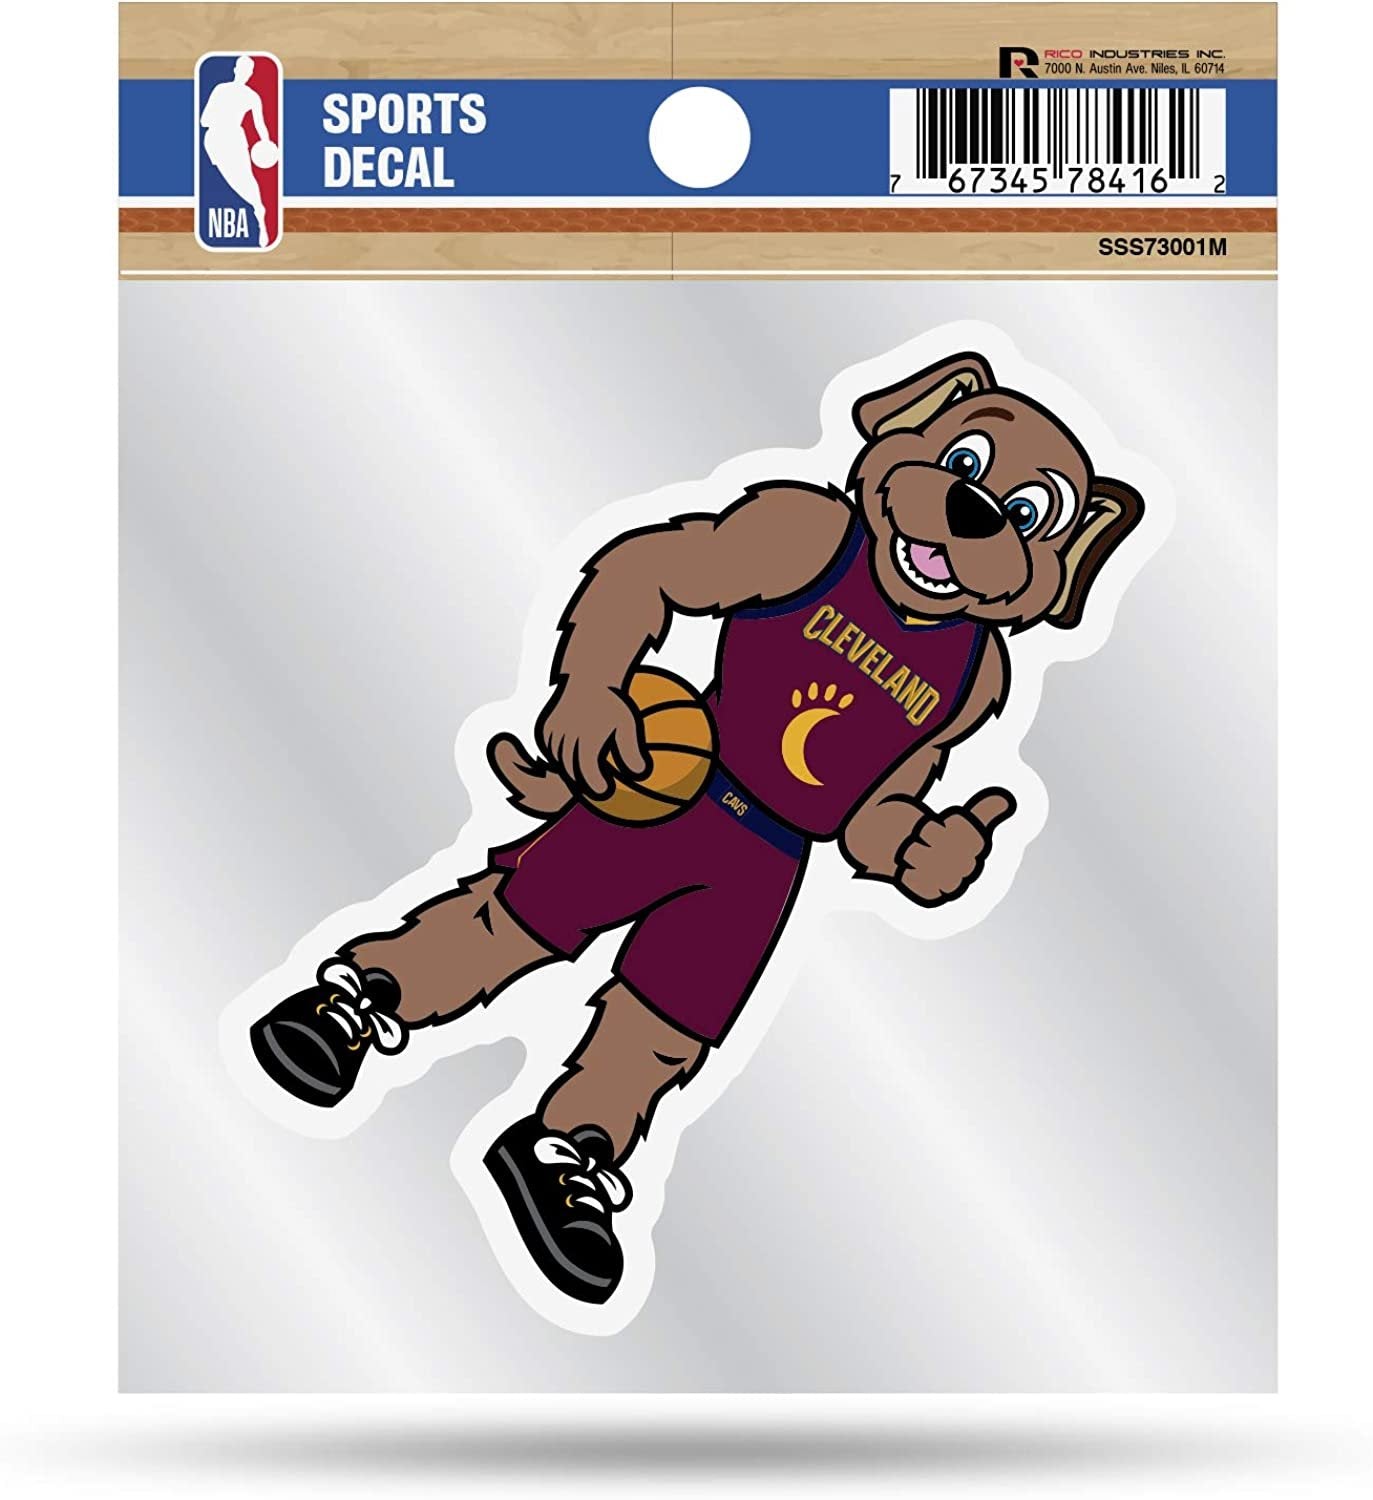 Cleveland Cavaliers 4x4 Decal Sticker Mascot Logo Premium with Clear Backing Flat Vinyl Auto Home NBA